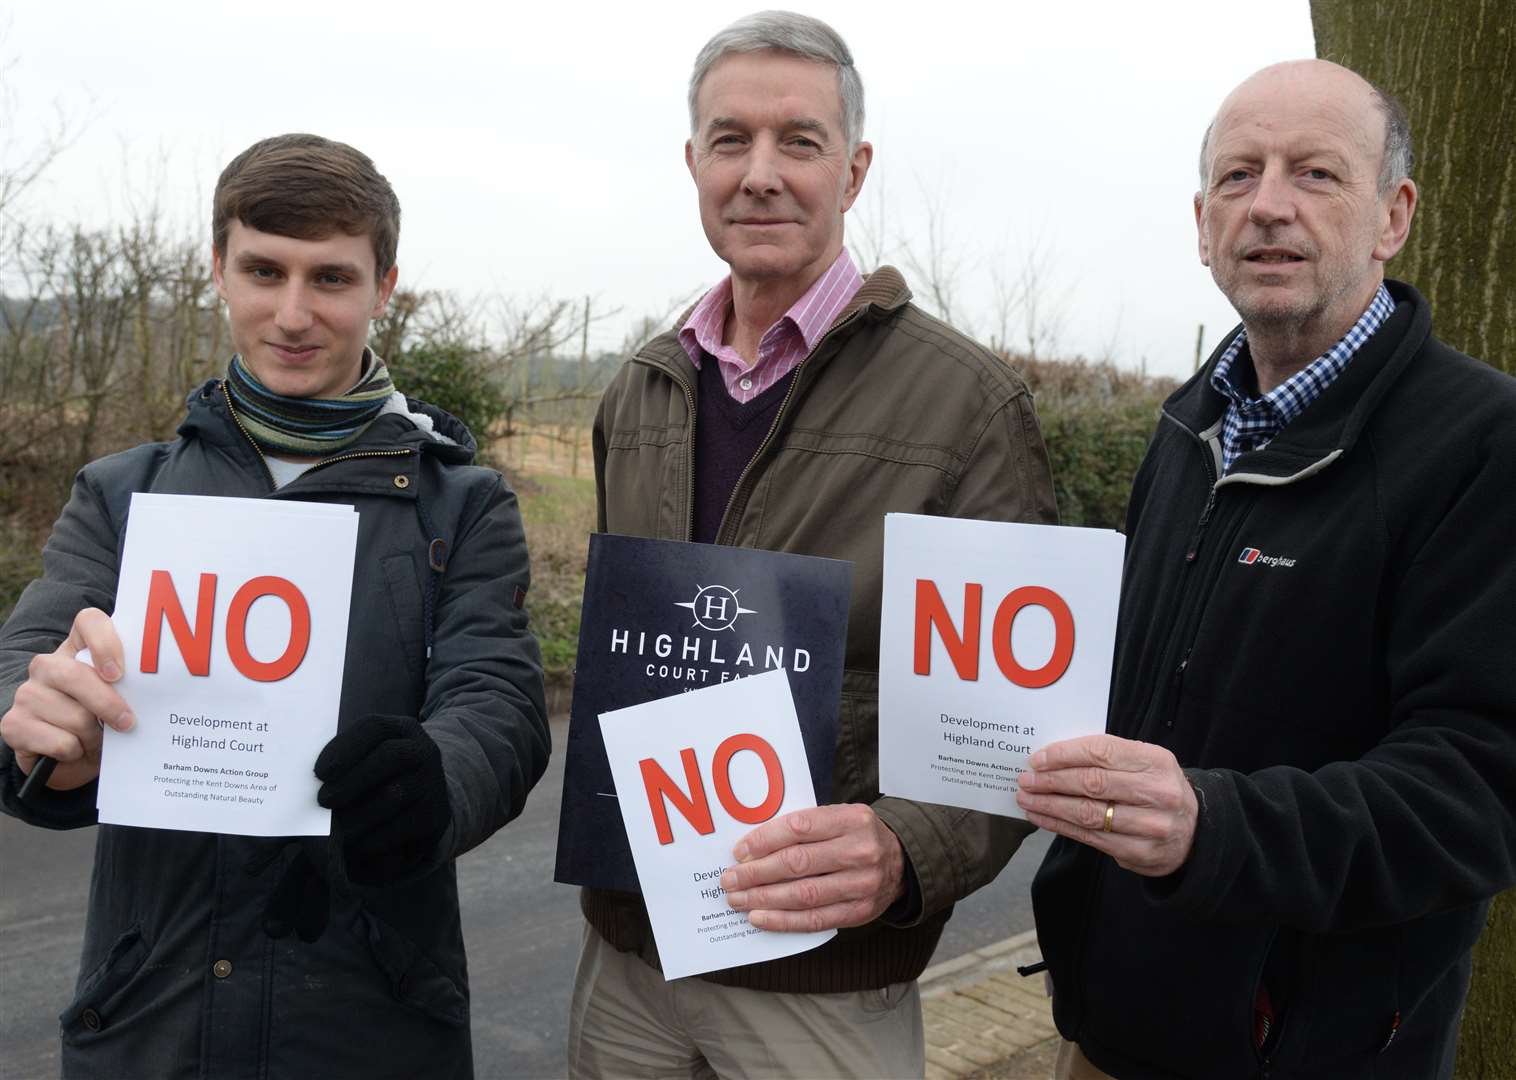 Jack Lowe, Dave Durell and David Humphries show opposition to the proposals at the consultation into the Highland Farm development